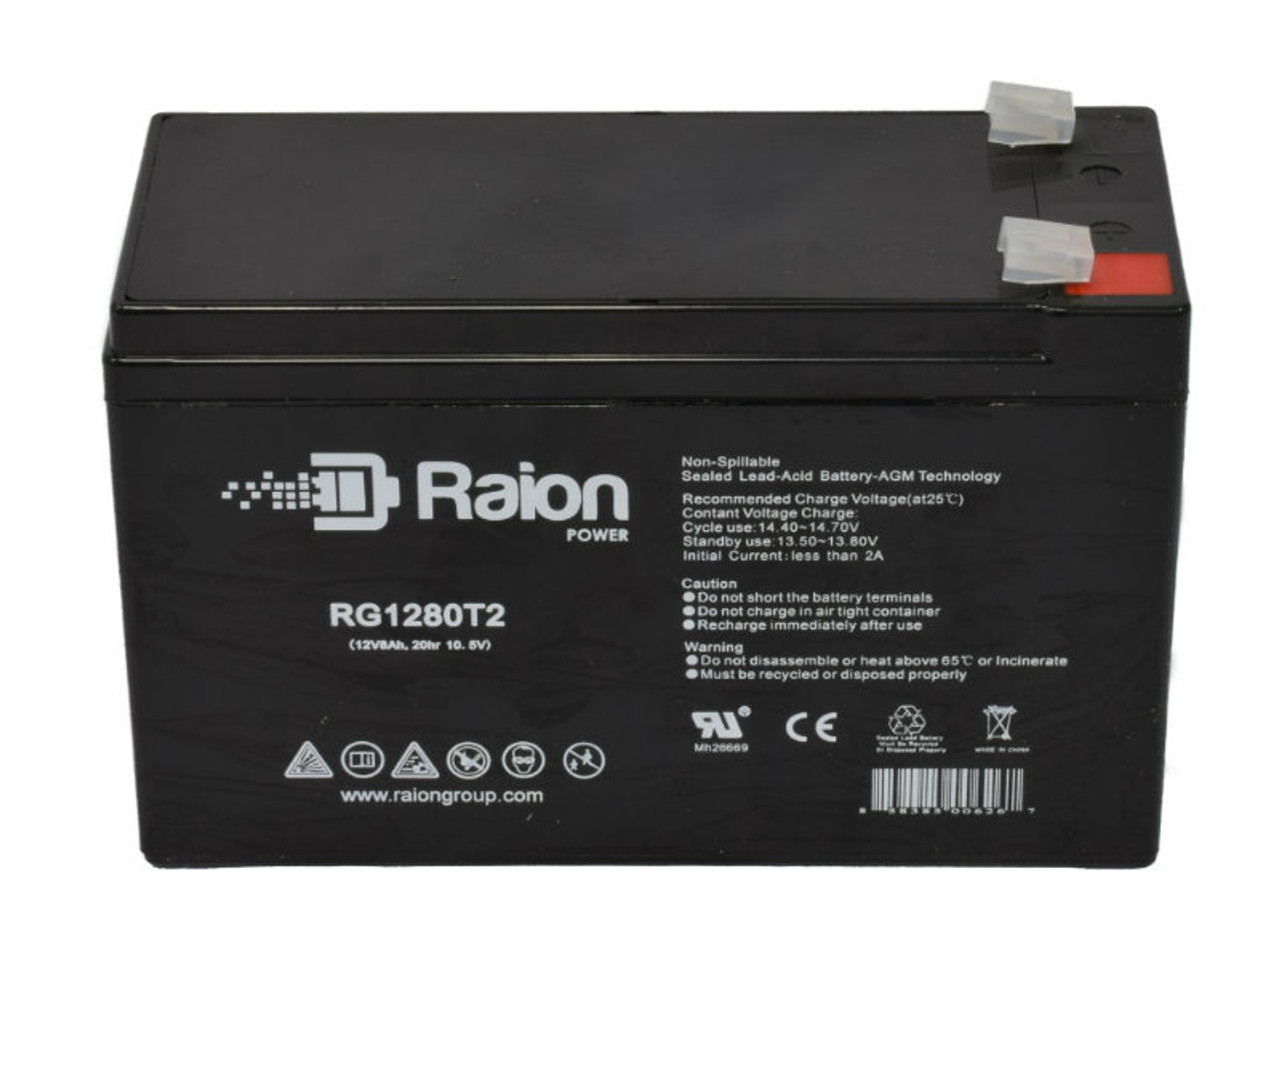 Raion Power RG1280T1 Replacement SLA Battery for Cyclops THOR X Sirius Rechargeable Spotlight